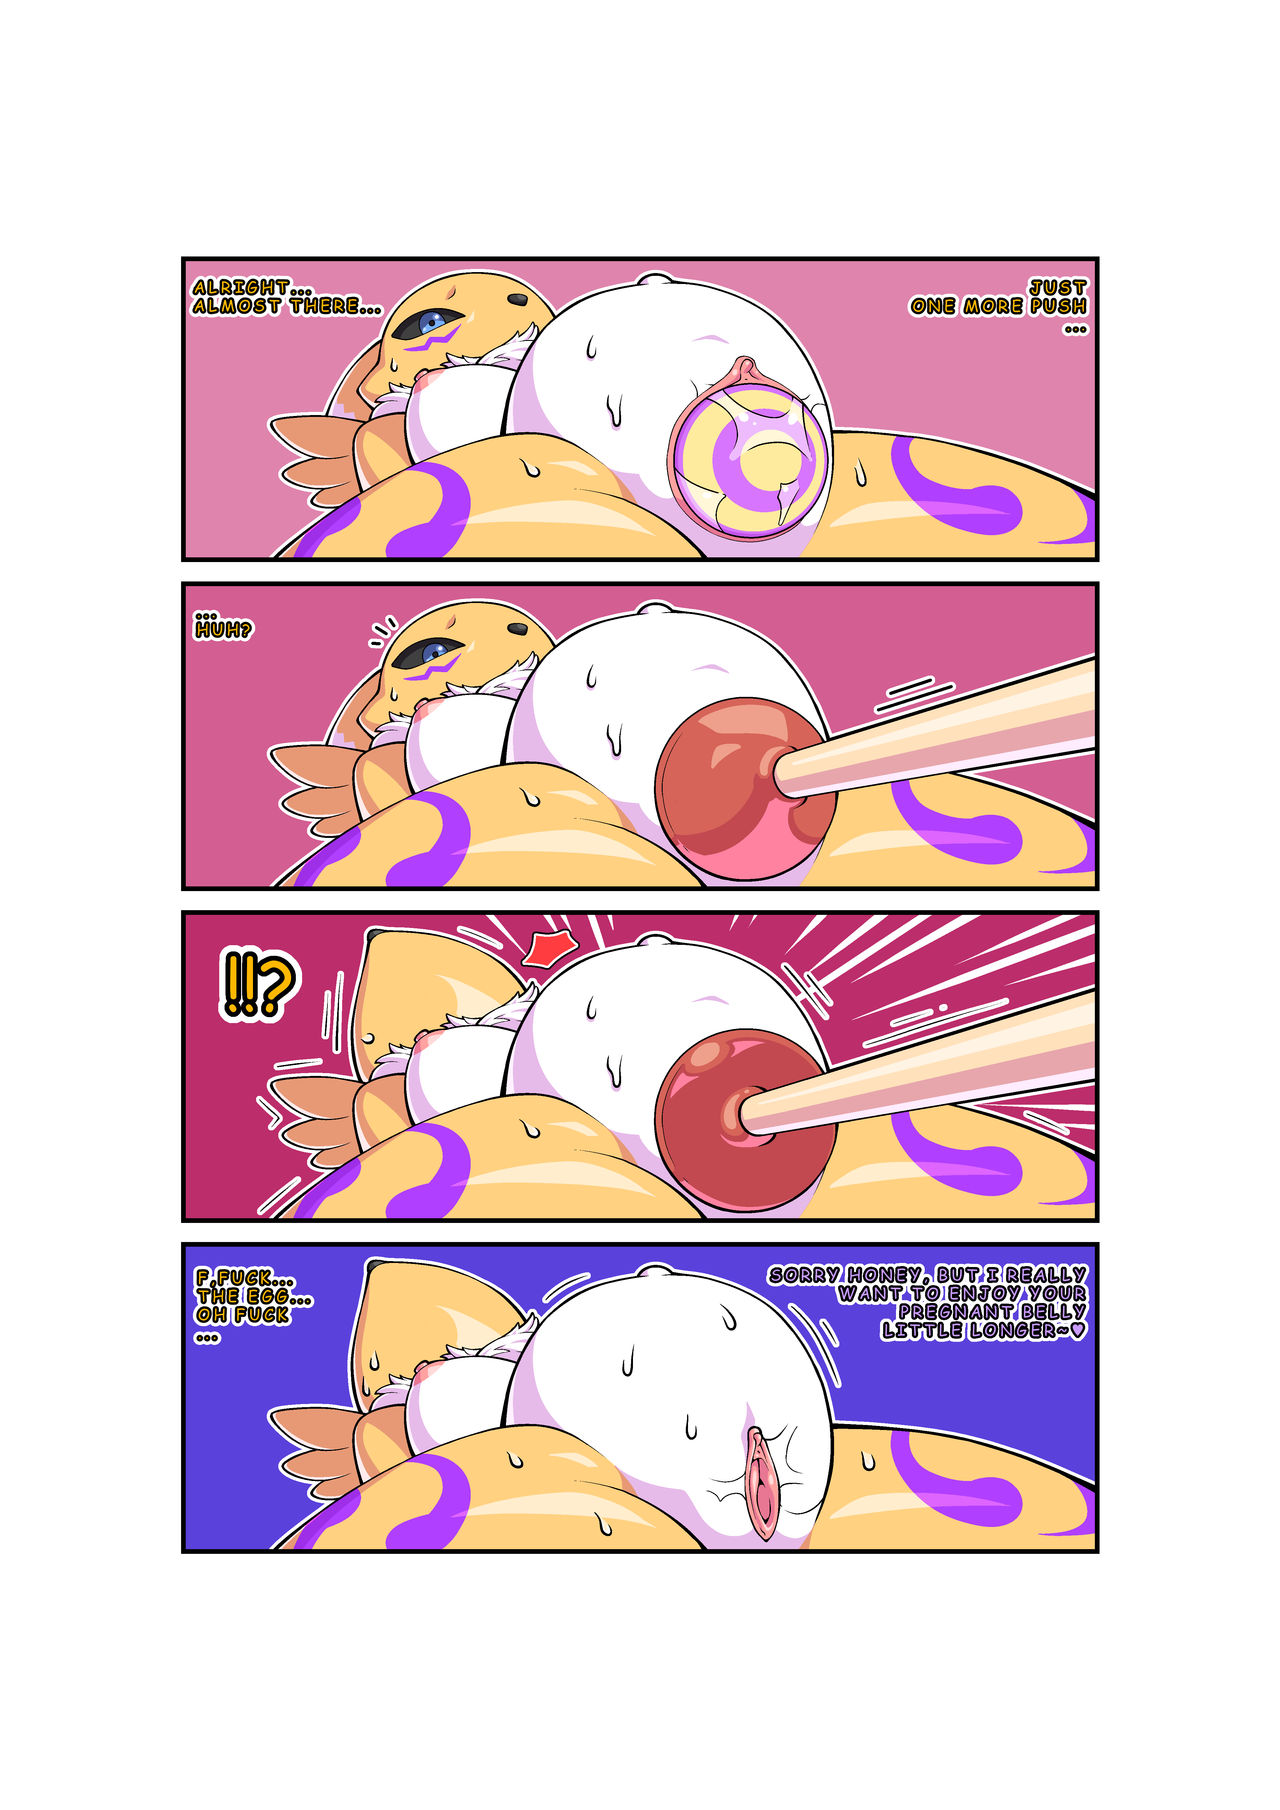 Renamon Eggs and Such - Page 5 - HentaiEra